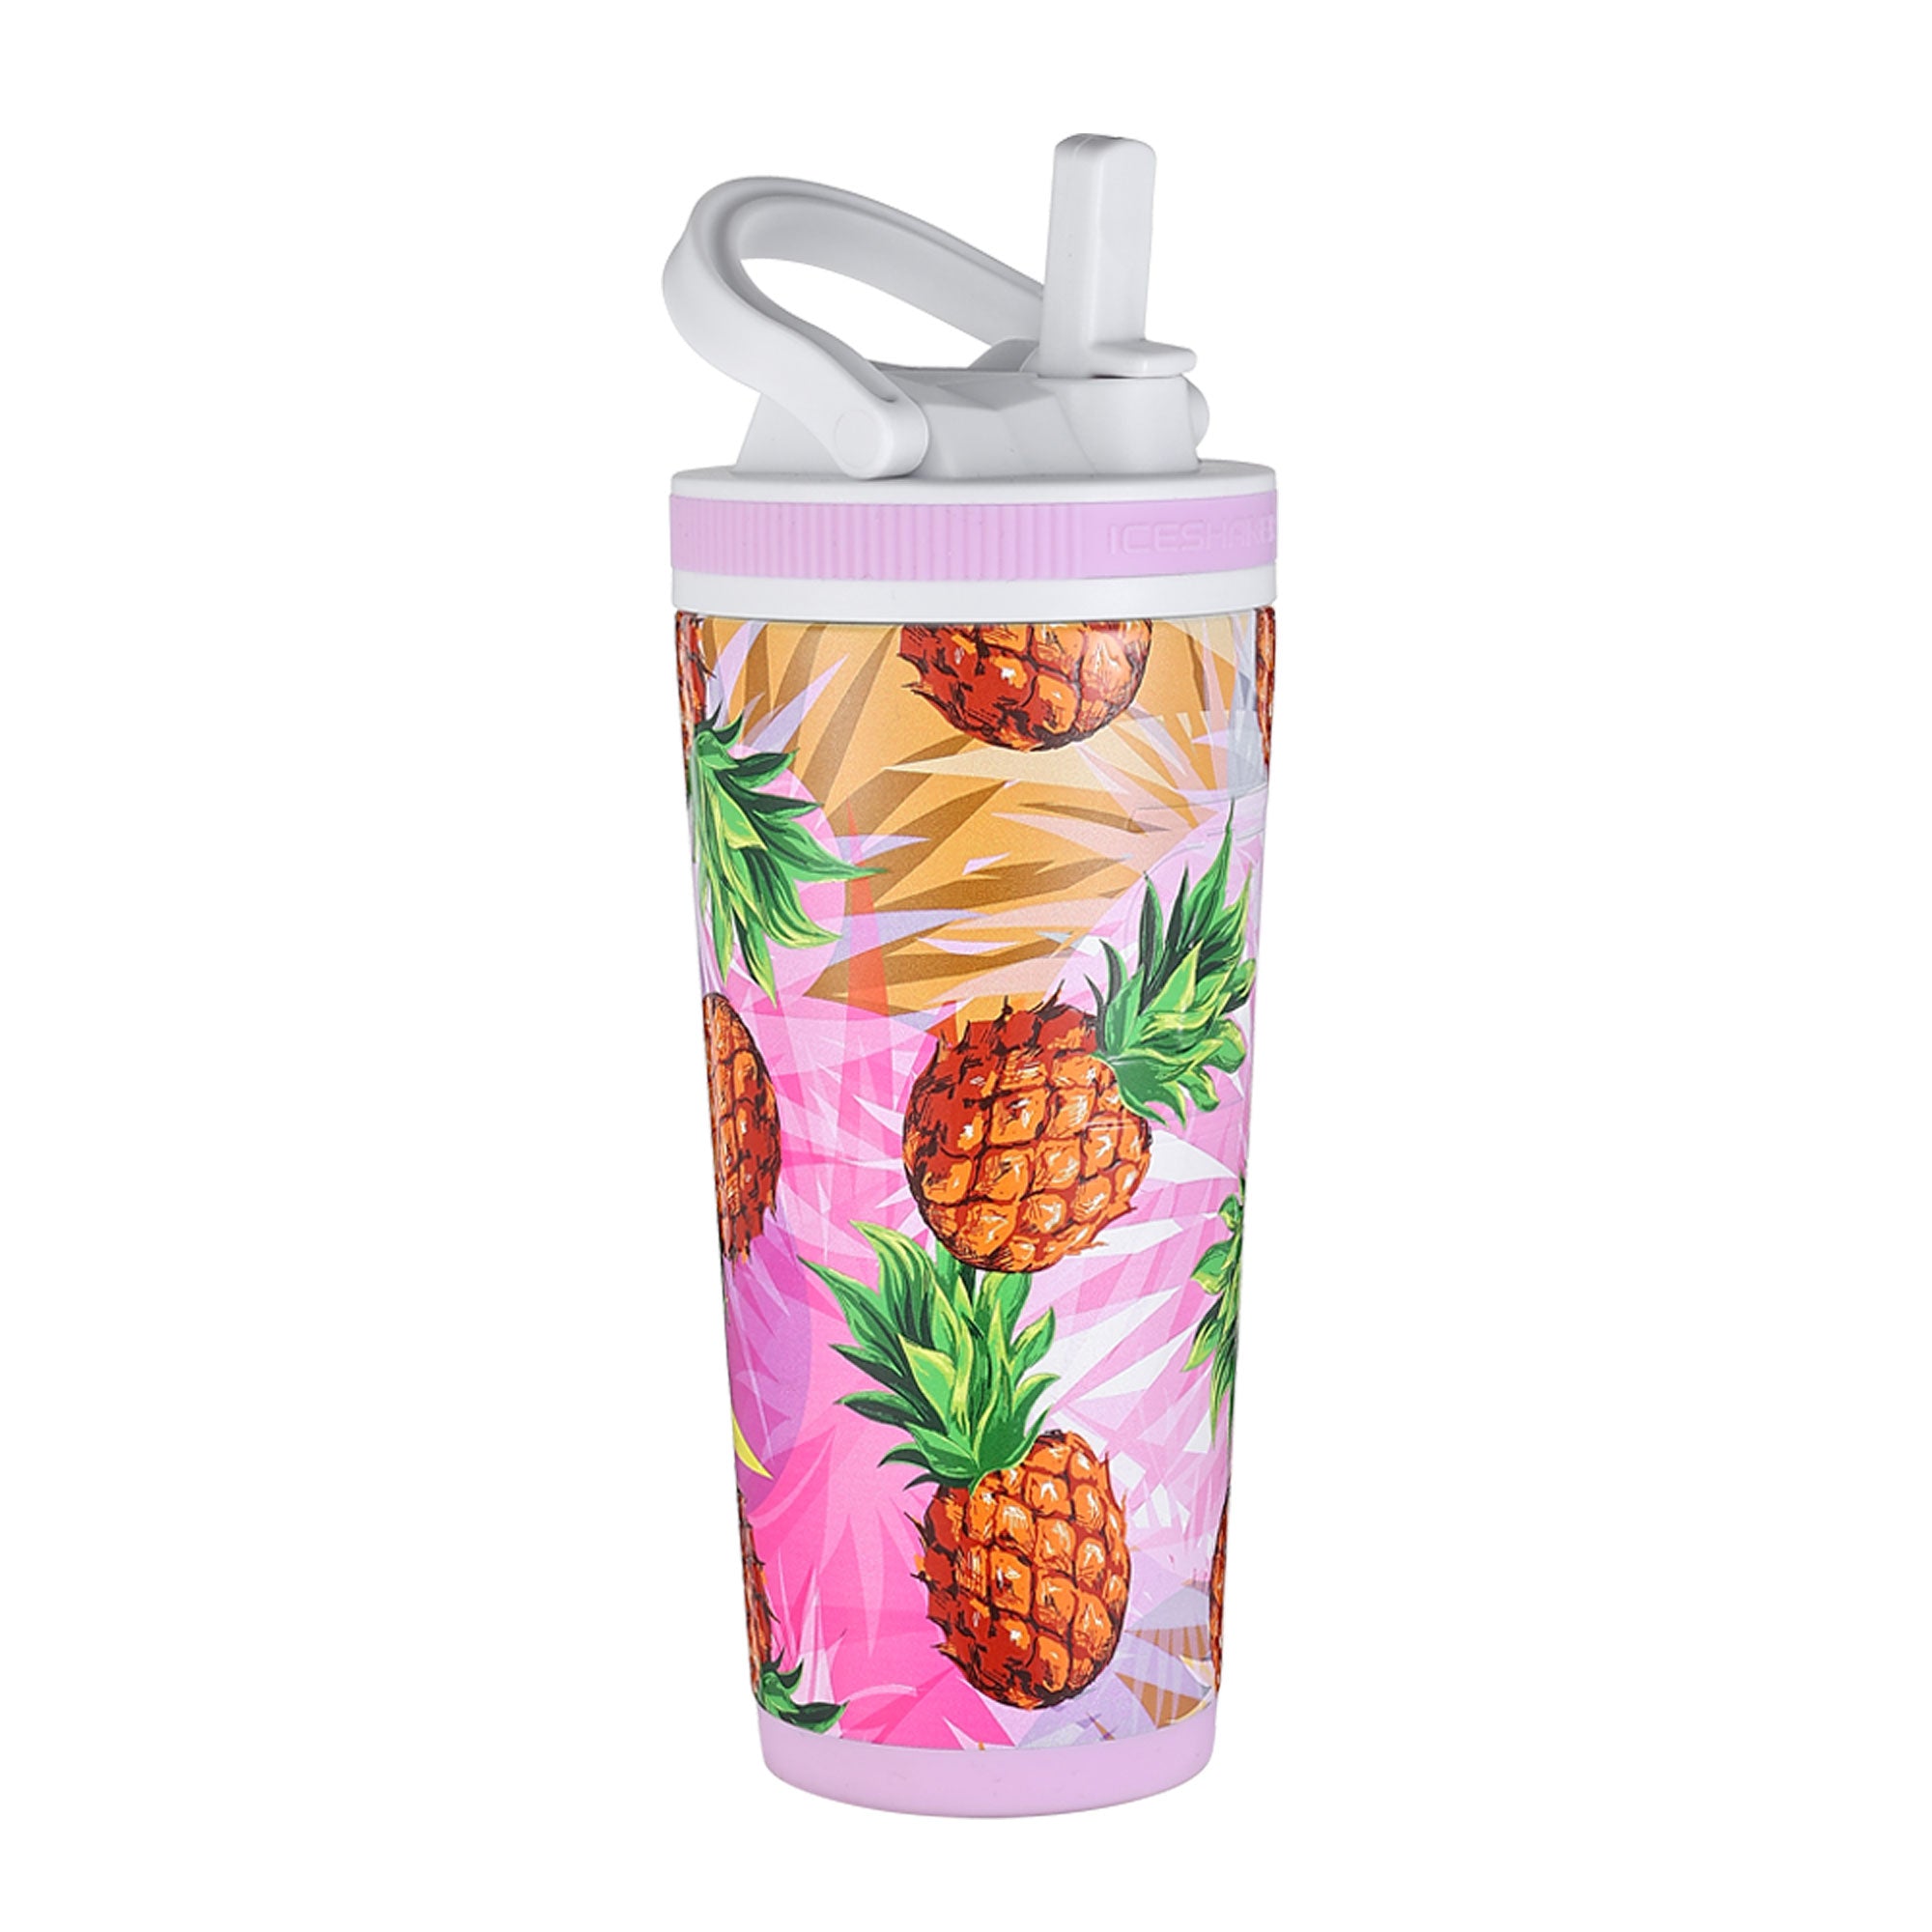 Pineapple Tumbler, Unique Pineapple Gifts for Women, Kids, Friends, Pineapple Cup/Water Bottle/Drink Cup/Coffee Travel Mug, Pineapple Stuff/